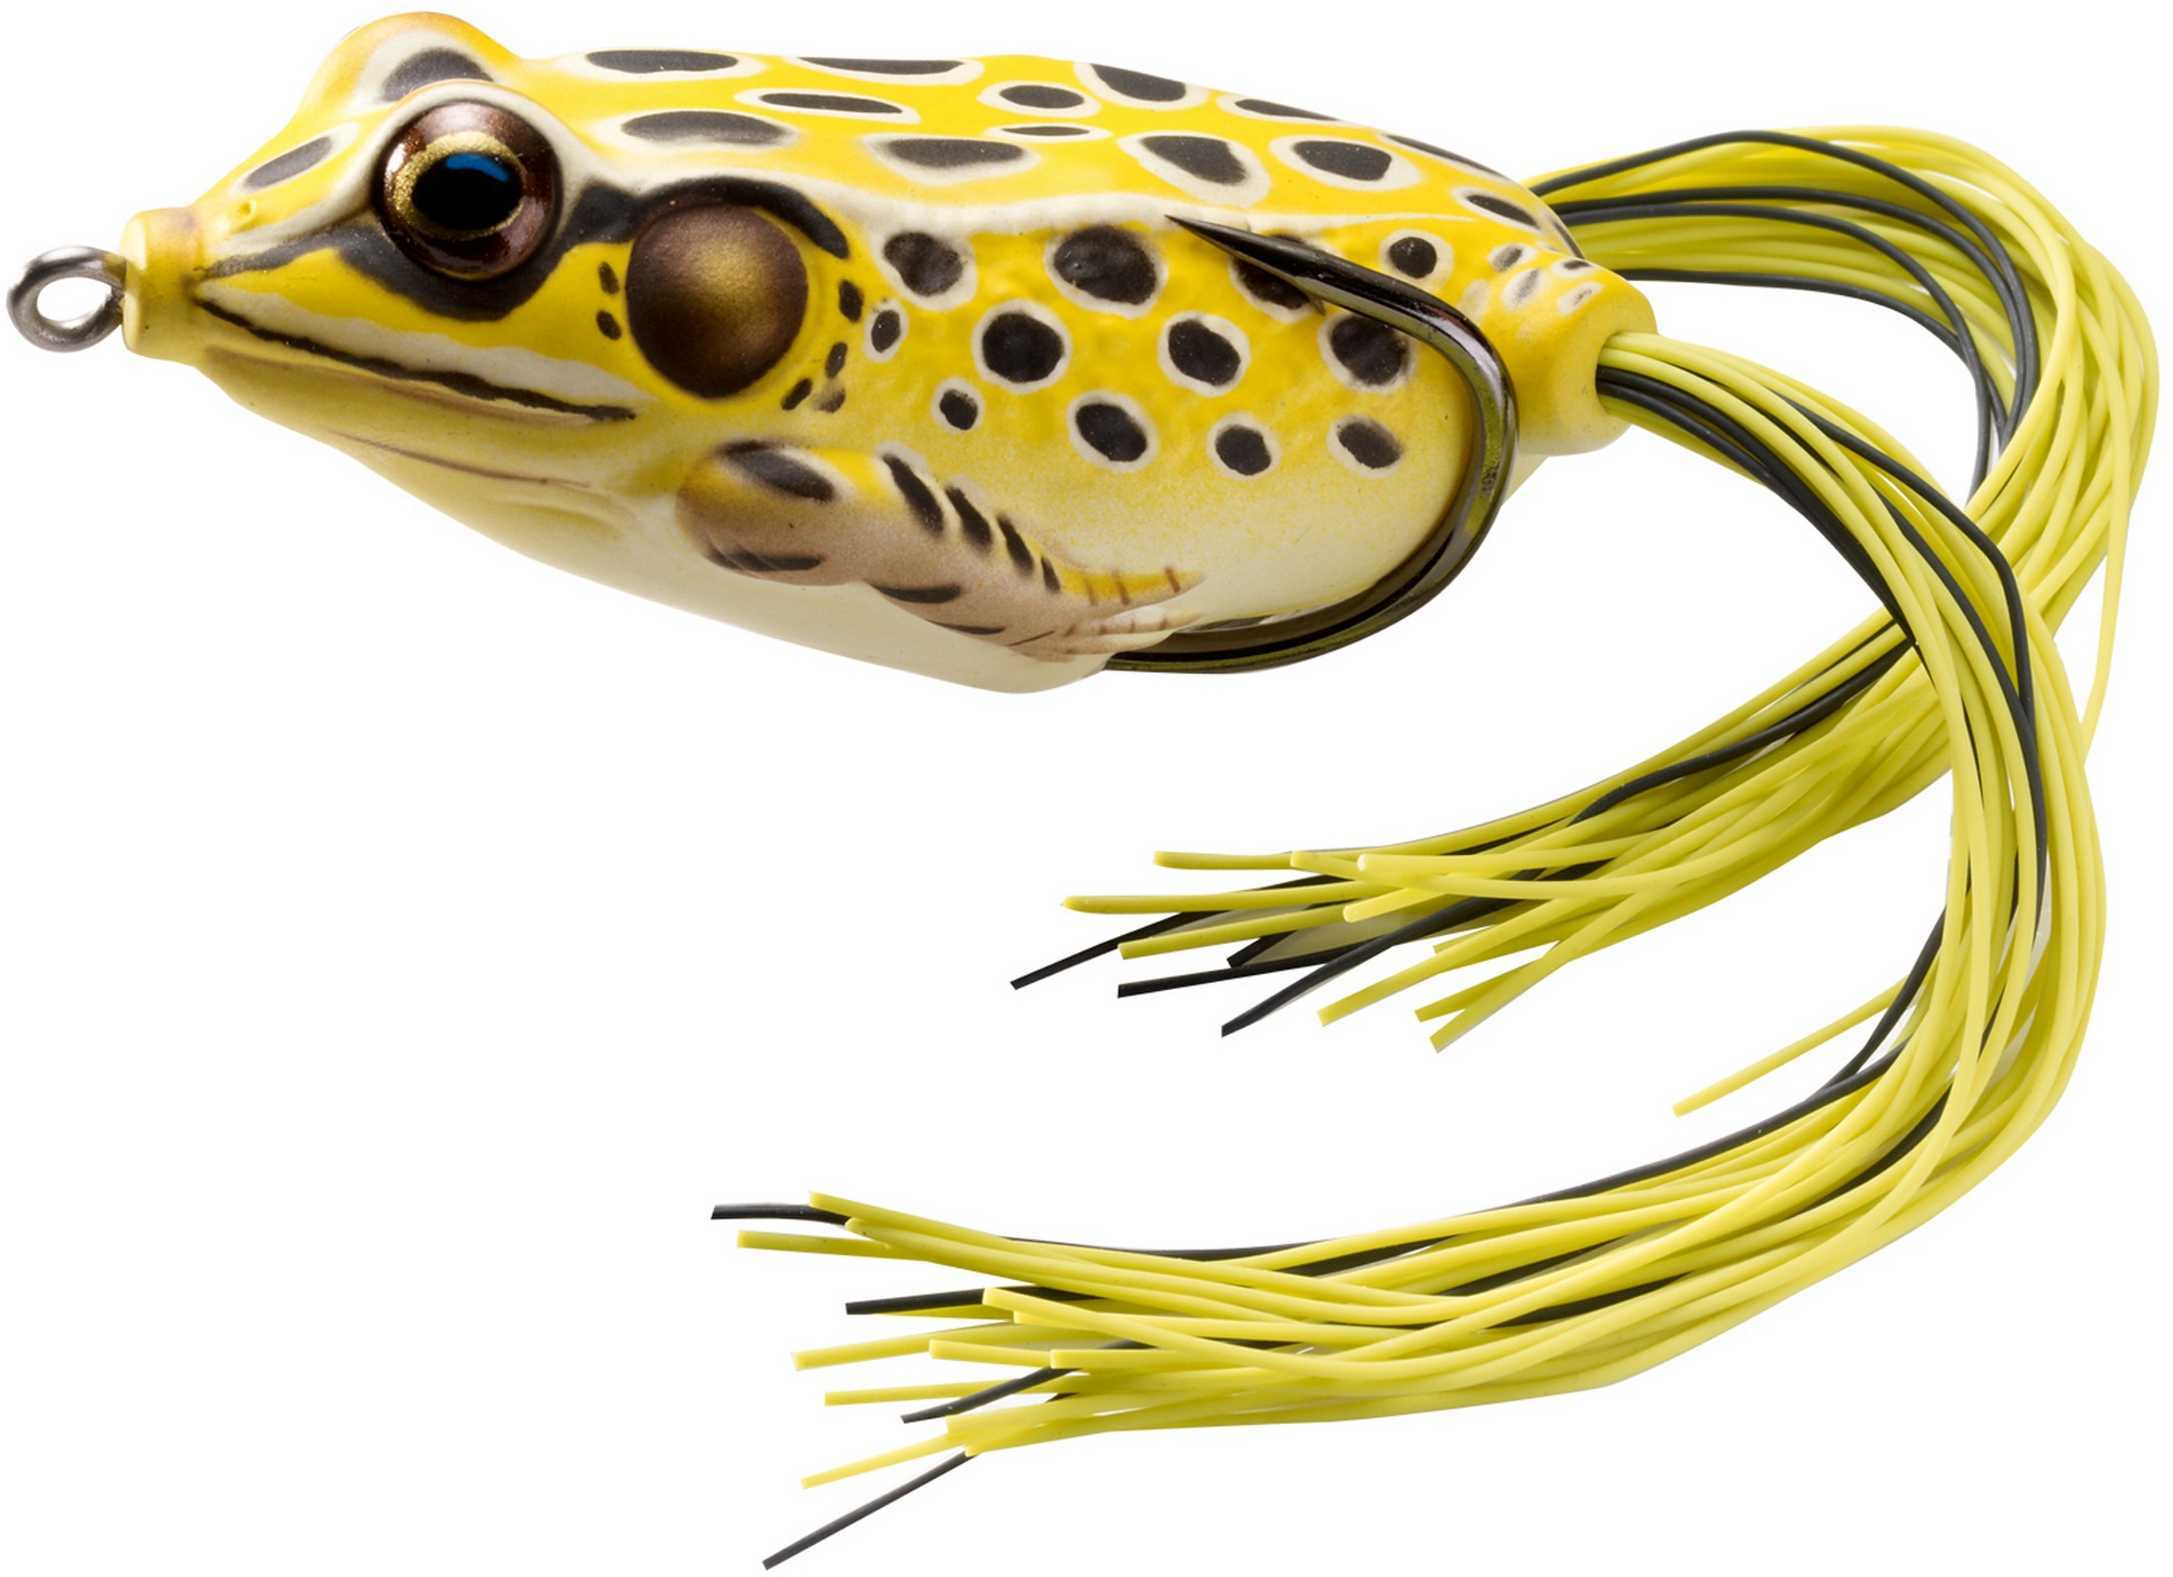 LIVETARGET Lures / Koppers Fishing and Tackle Corp Usa Hollow Body Frog 5/8oz 2 1/4in Yellow Black Md#: FGH55T-501